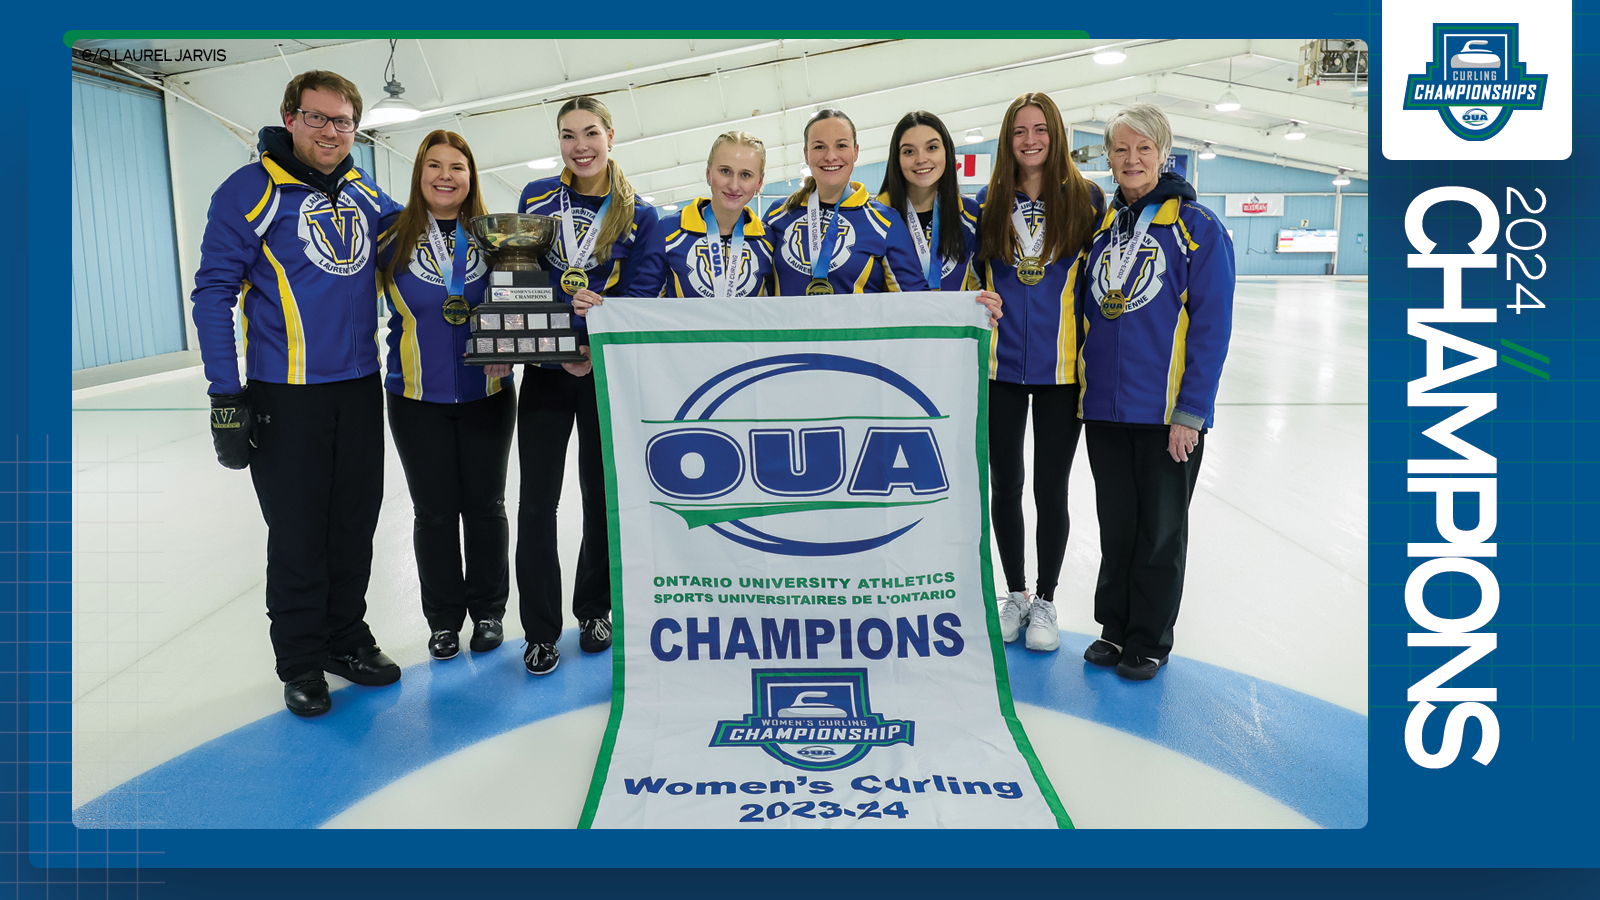 Predominantly blue graphic covered mostly by 2024 OUA Women's Curling Championship banner photo, with the corresponding championship logo and white text reading '2024 Champions' on the right side